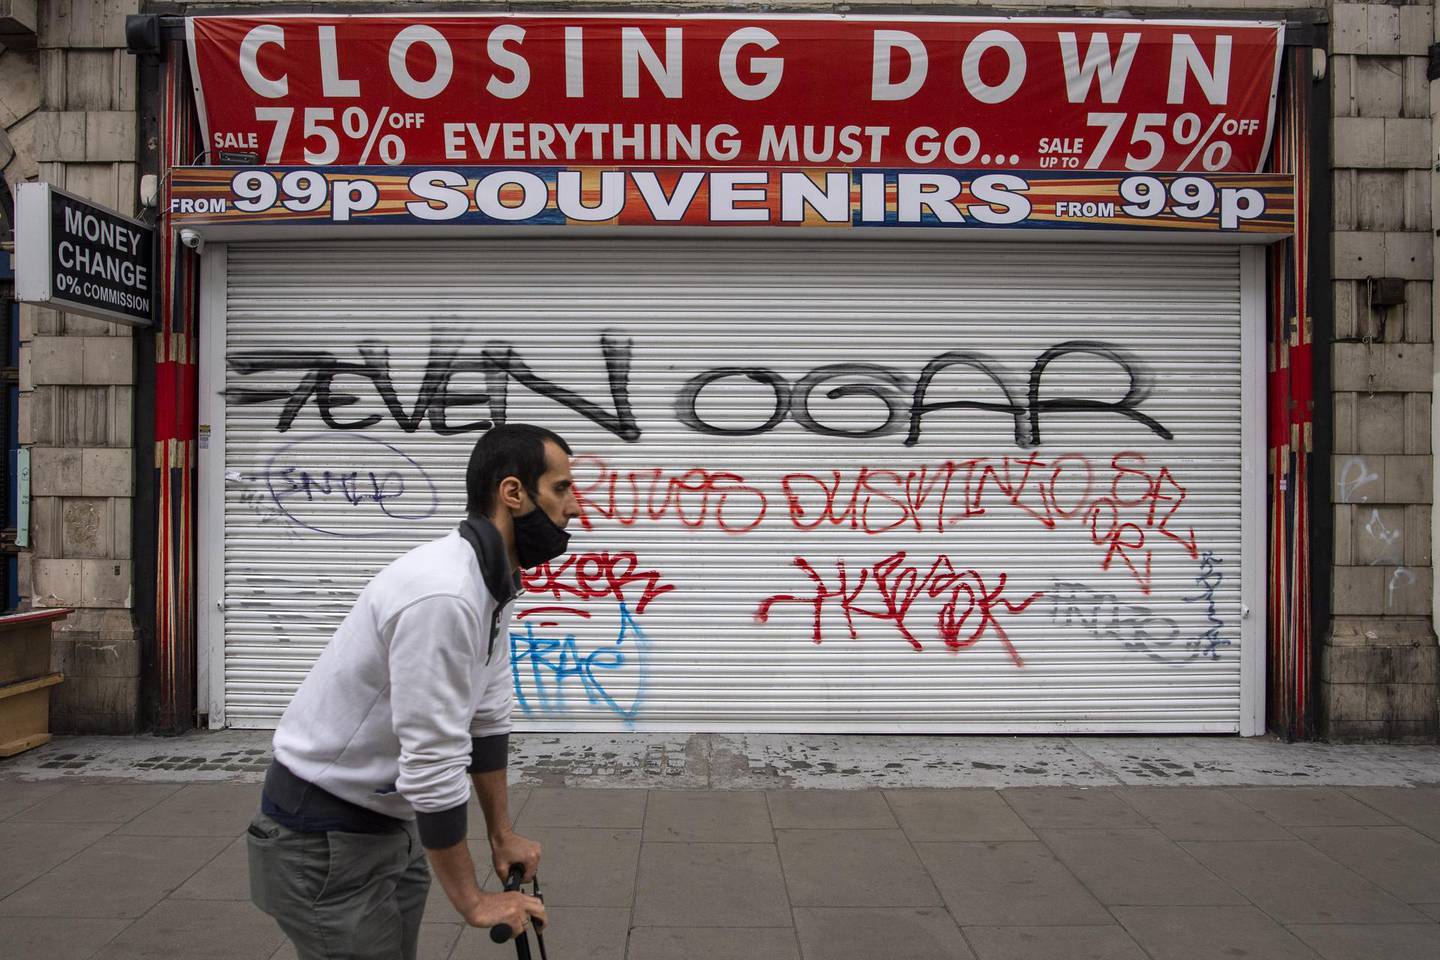 LONDON, UNITED KINGDOM - JUNE 12: A man in a face mask rides a scooter past a shuttered shop on Oxford Street on June 12, 2020 in London, England.  As the British government further relaxes Covid-19 lockdown measures in England, this week sees preparations being made to open non-essential stores and Transport for London handing out face masks to commuters. International travelers arriving in the UK will face a 14-day quarantine period. (Photo by Justin Setterfield/Getty Images)